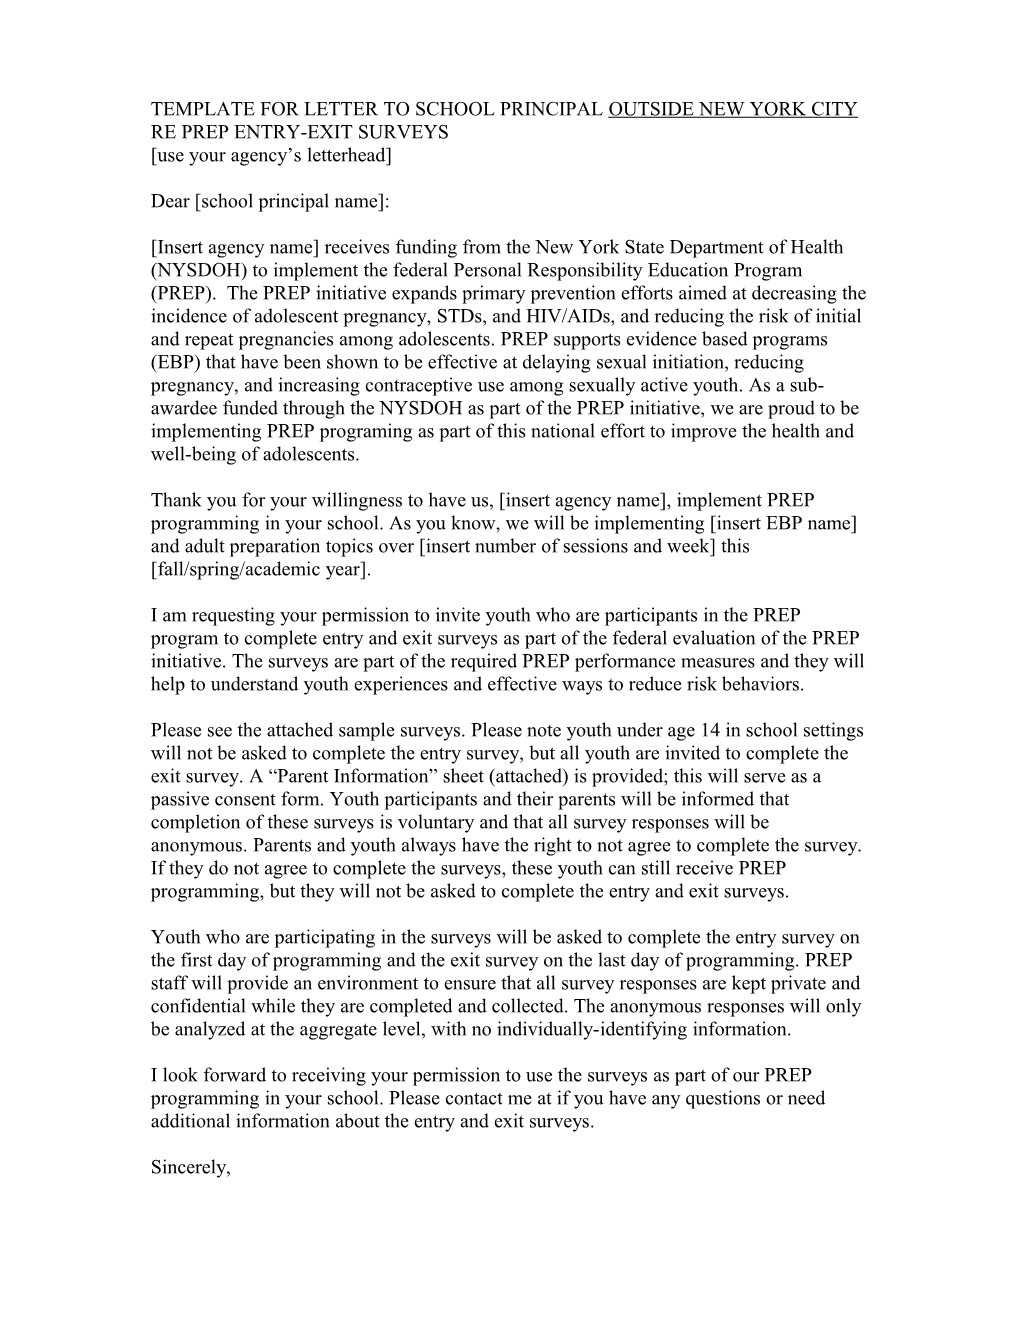 Template for Letter to School Principal Outside New York City Re Prep Entry-Exit Surveys